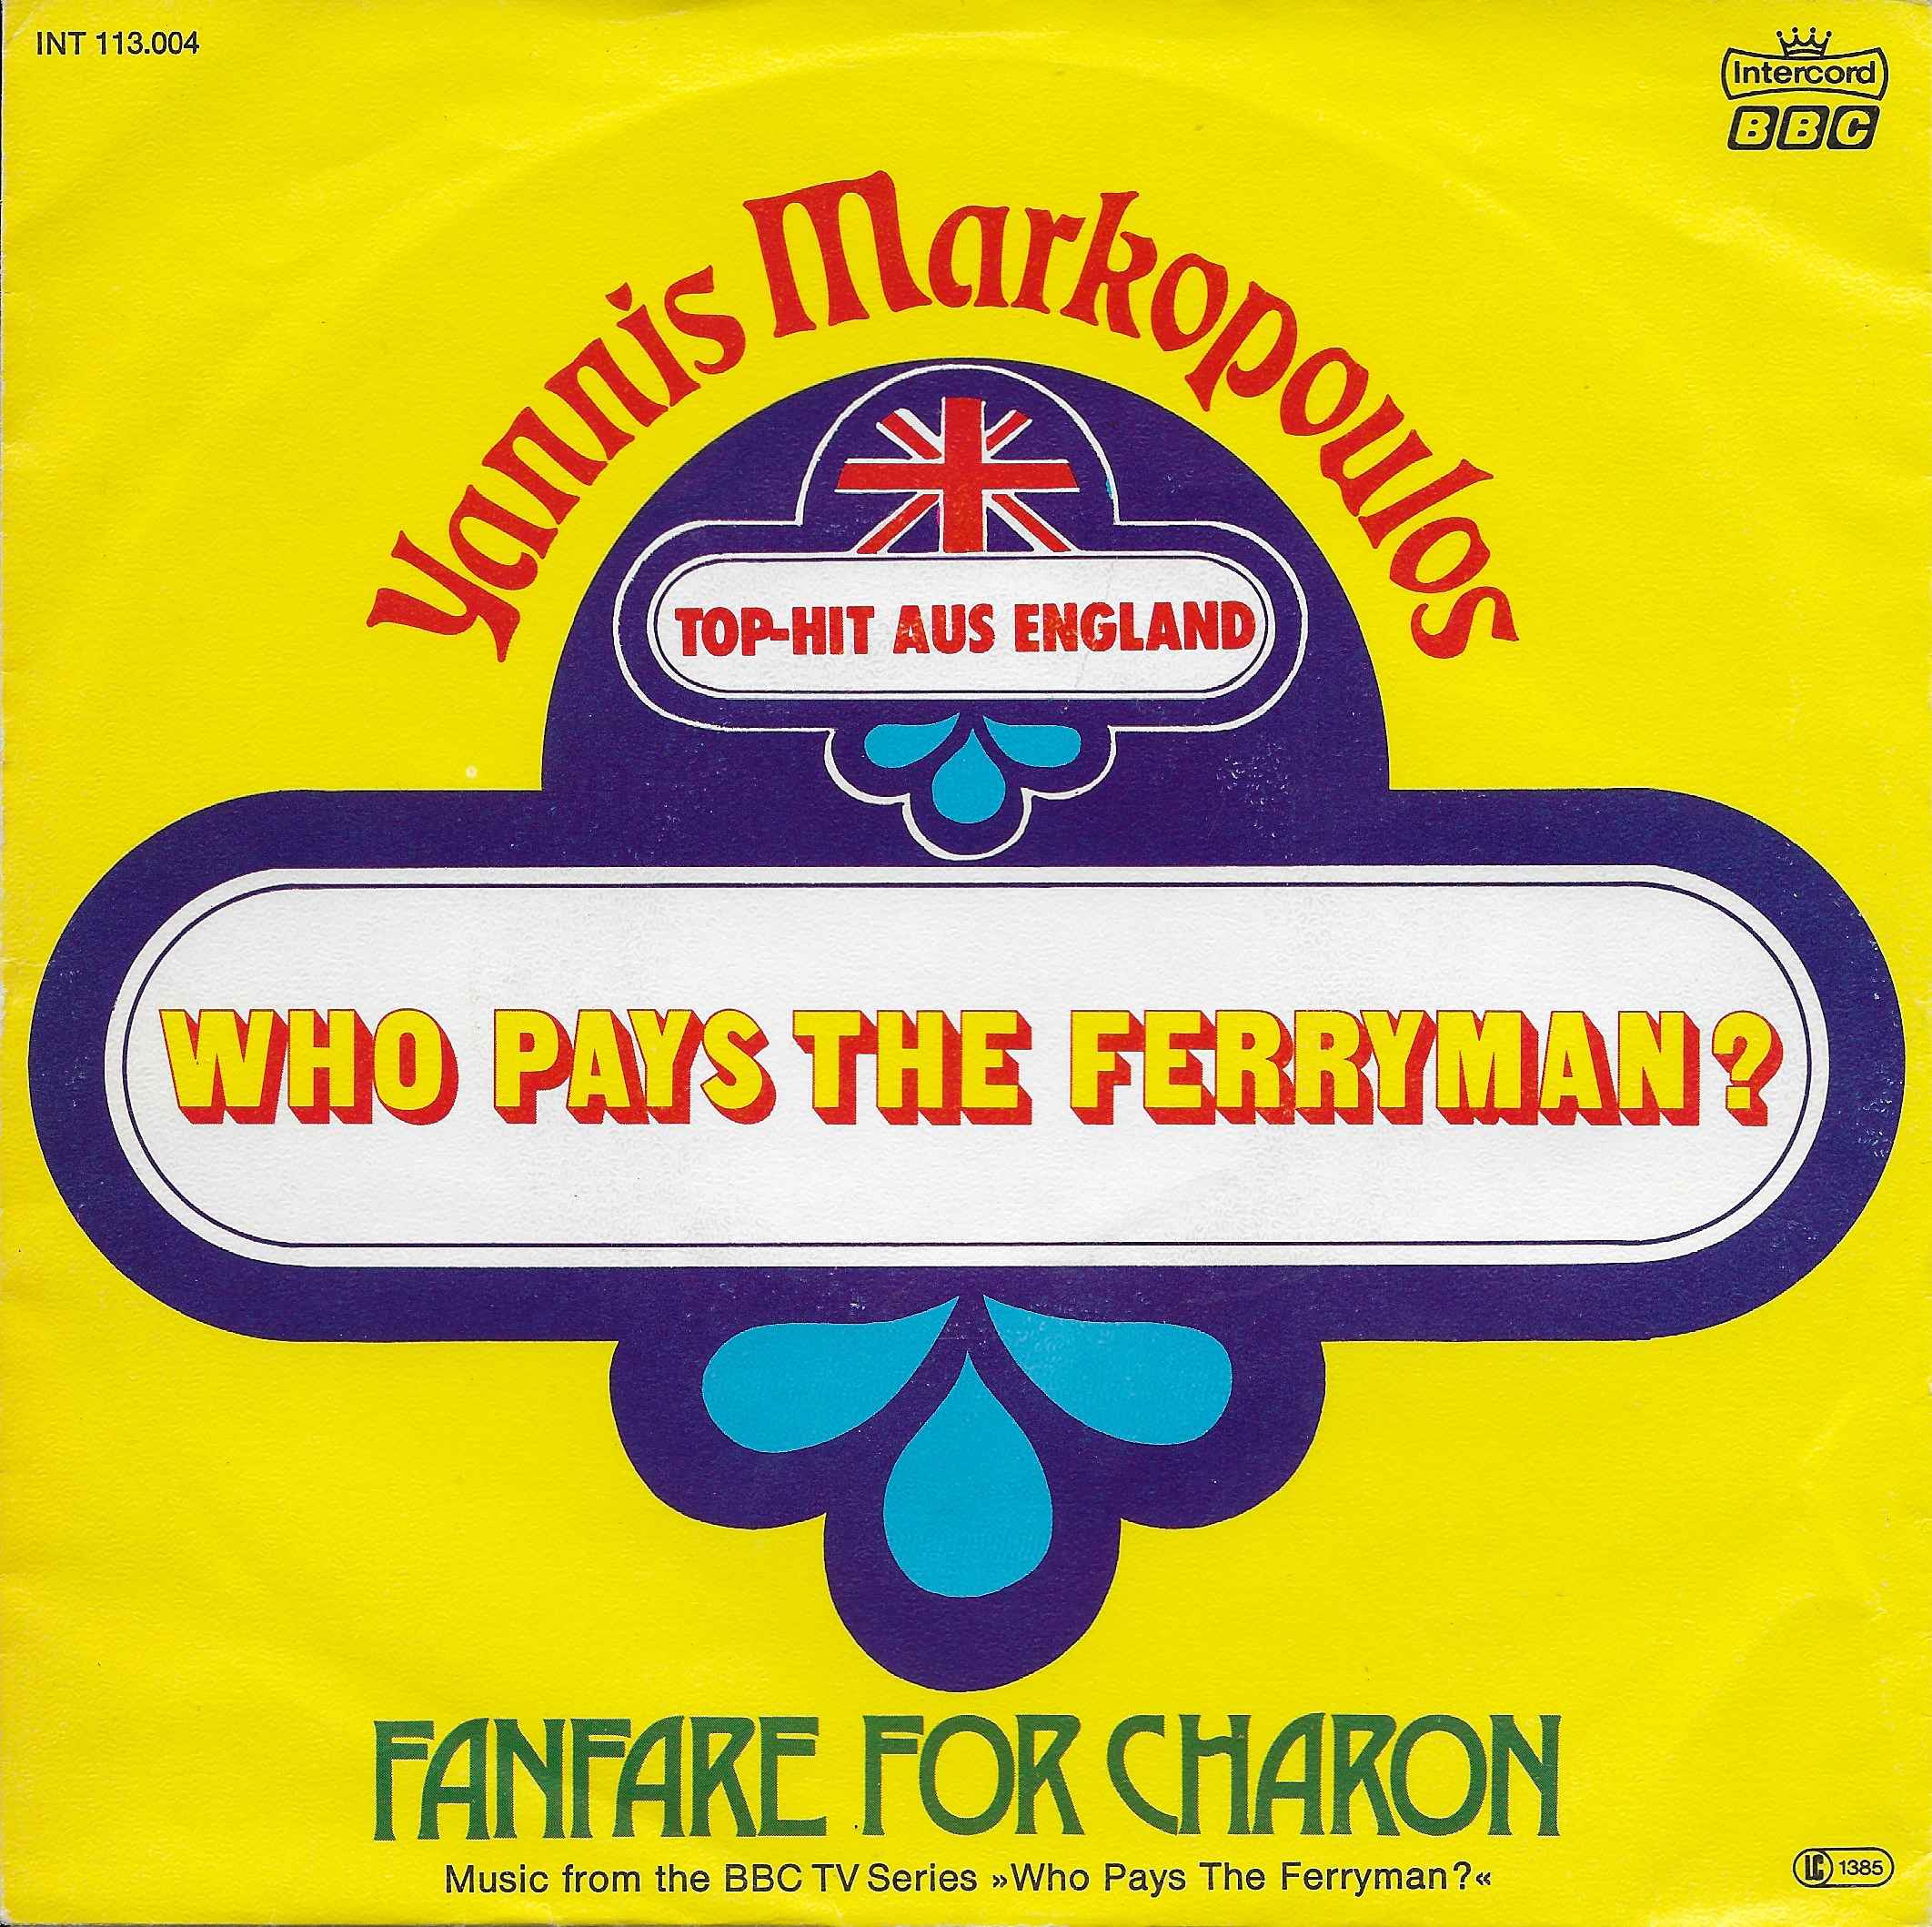 Picture of INT 113.004 Who pays the ferryman? (German import) by artist Yannis Markopoulos from the BBC records and Tapes library